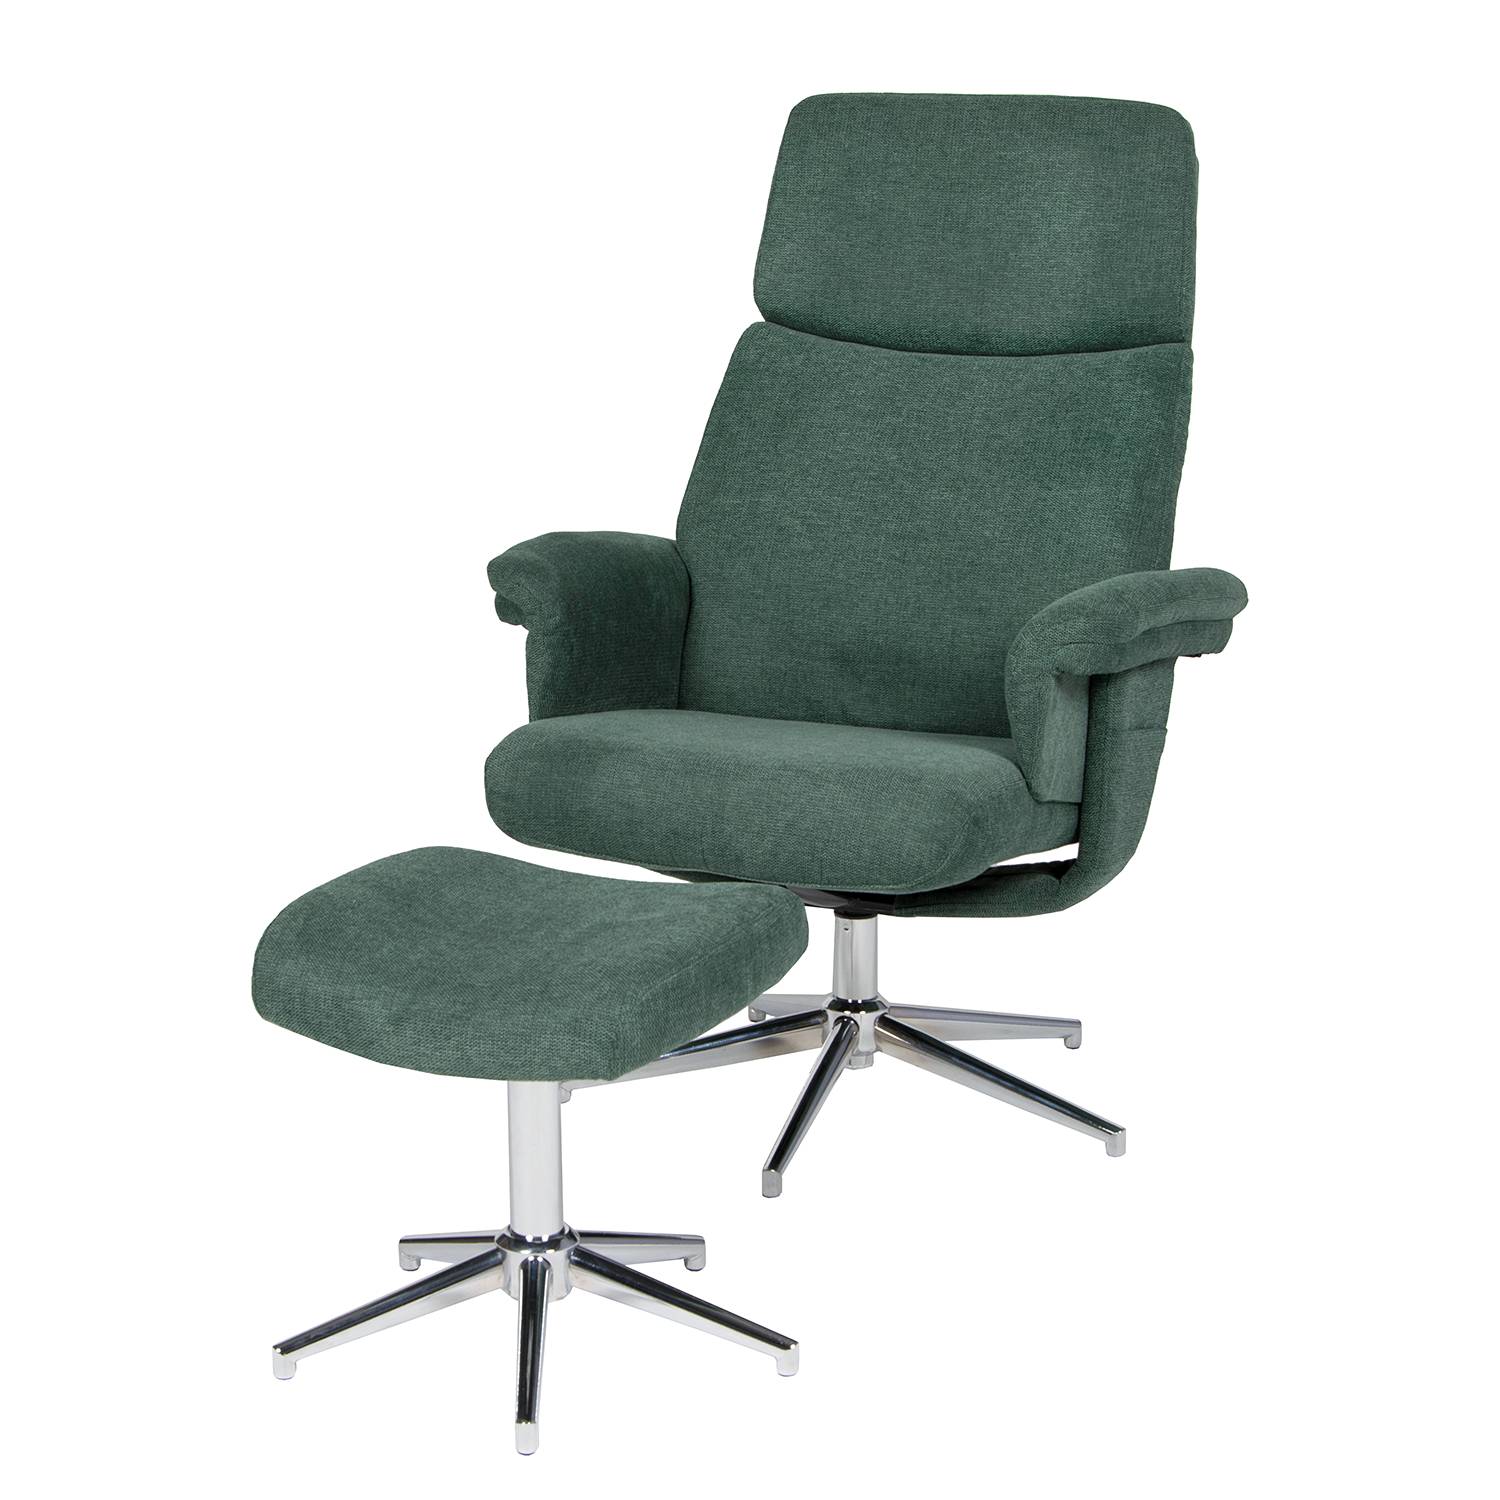 Image of Fauteuil relax Sudbury 000000001000216315